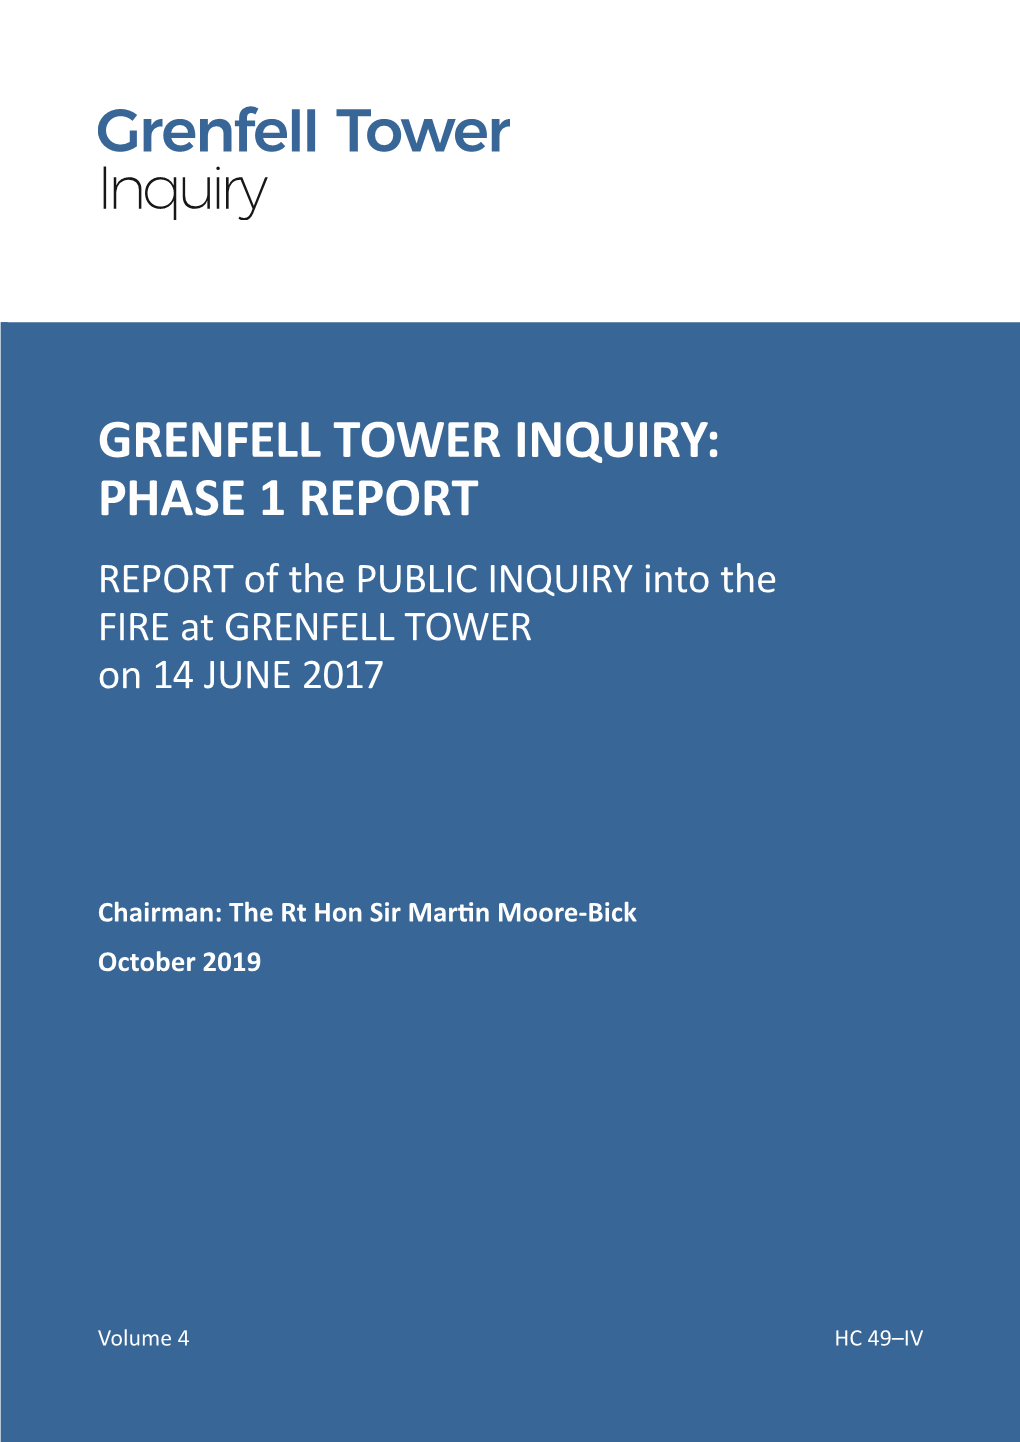 HC 49-IV – the Grenfell Tower Inquiry: Phase 1 Report